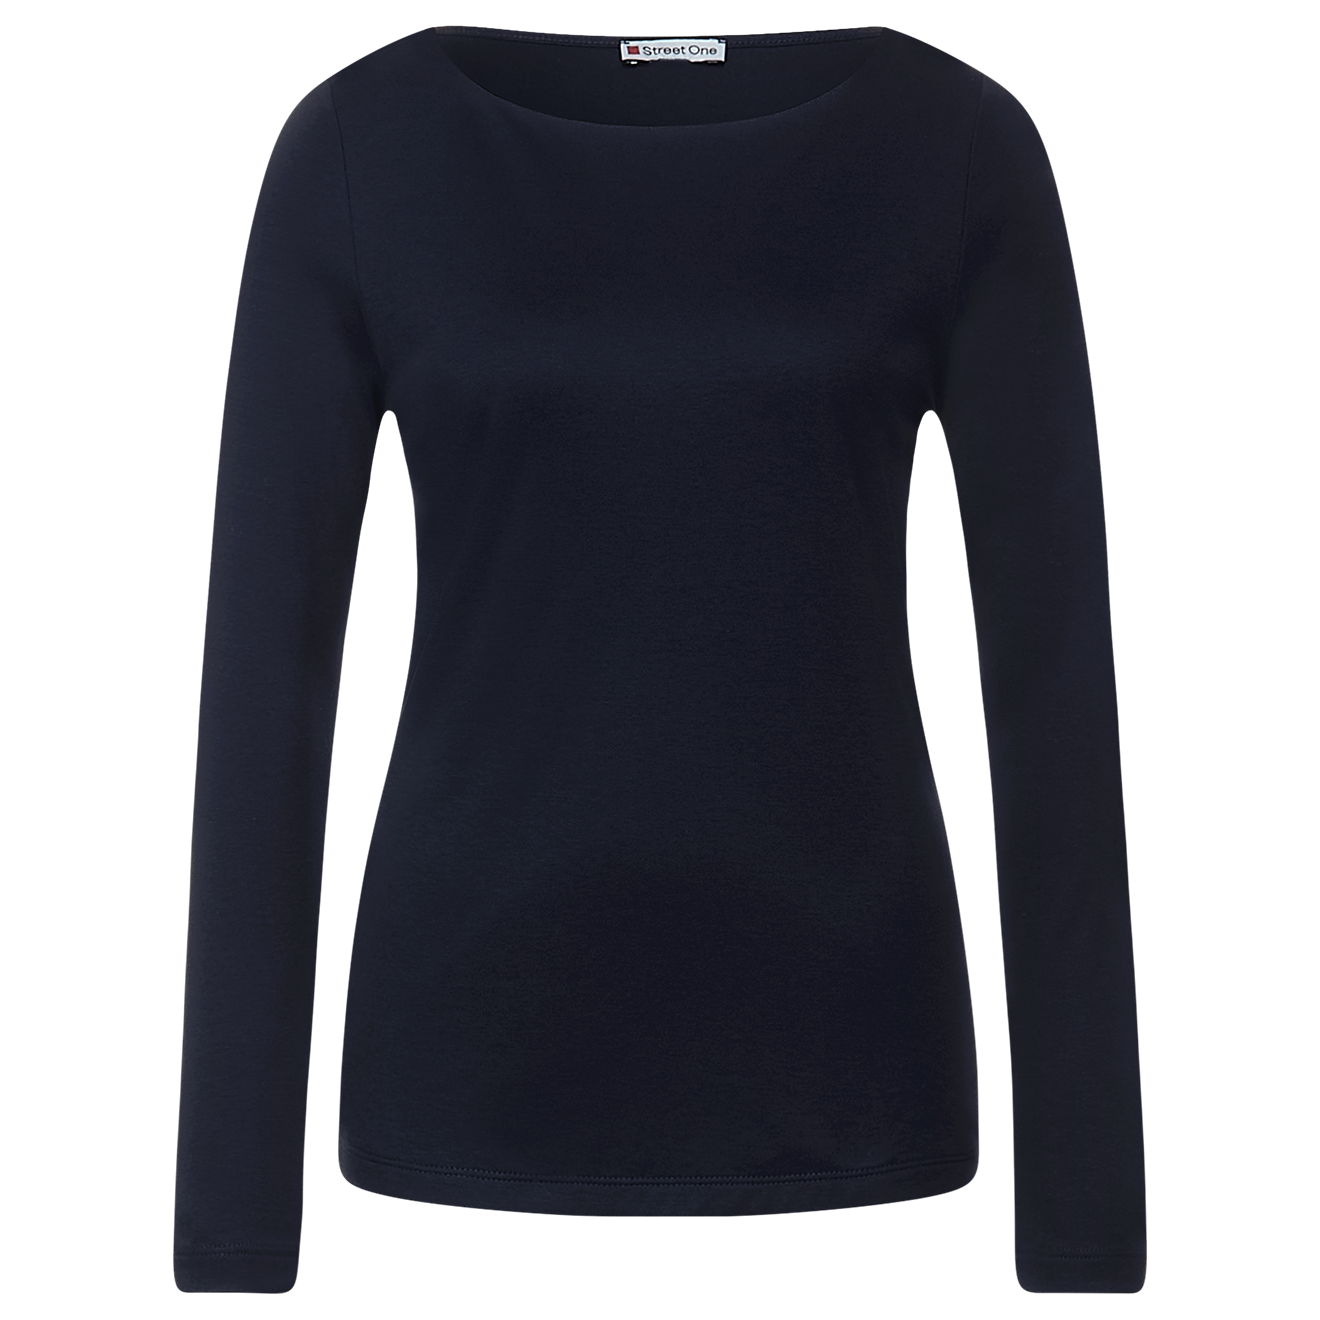 *Longsleeve. Cannot be combined with other discounts. (RRP €29.99 | outlet price €17.99)